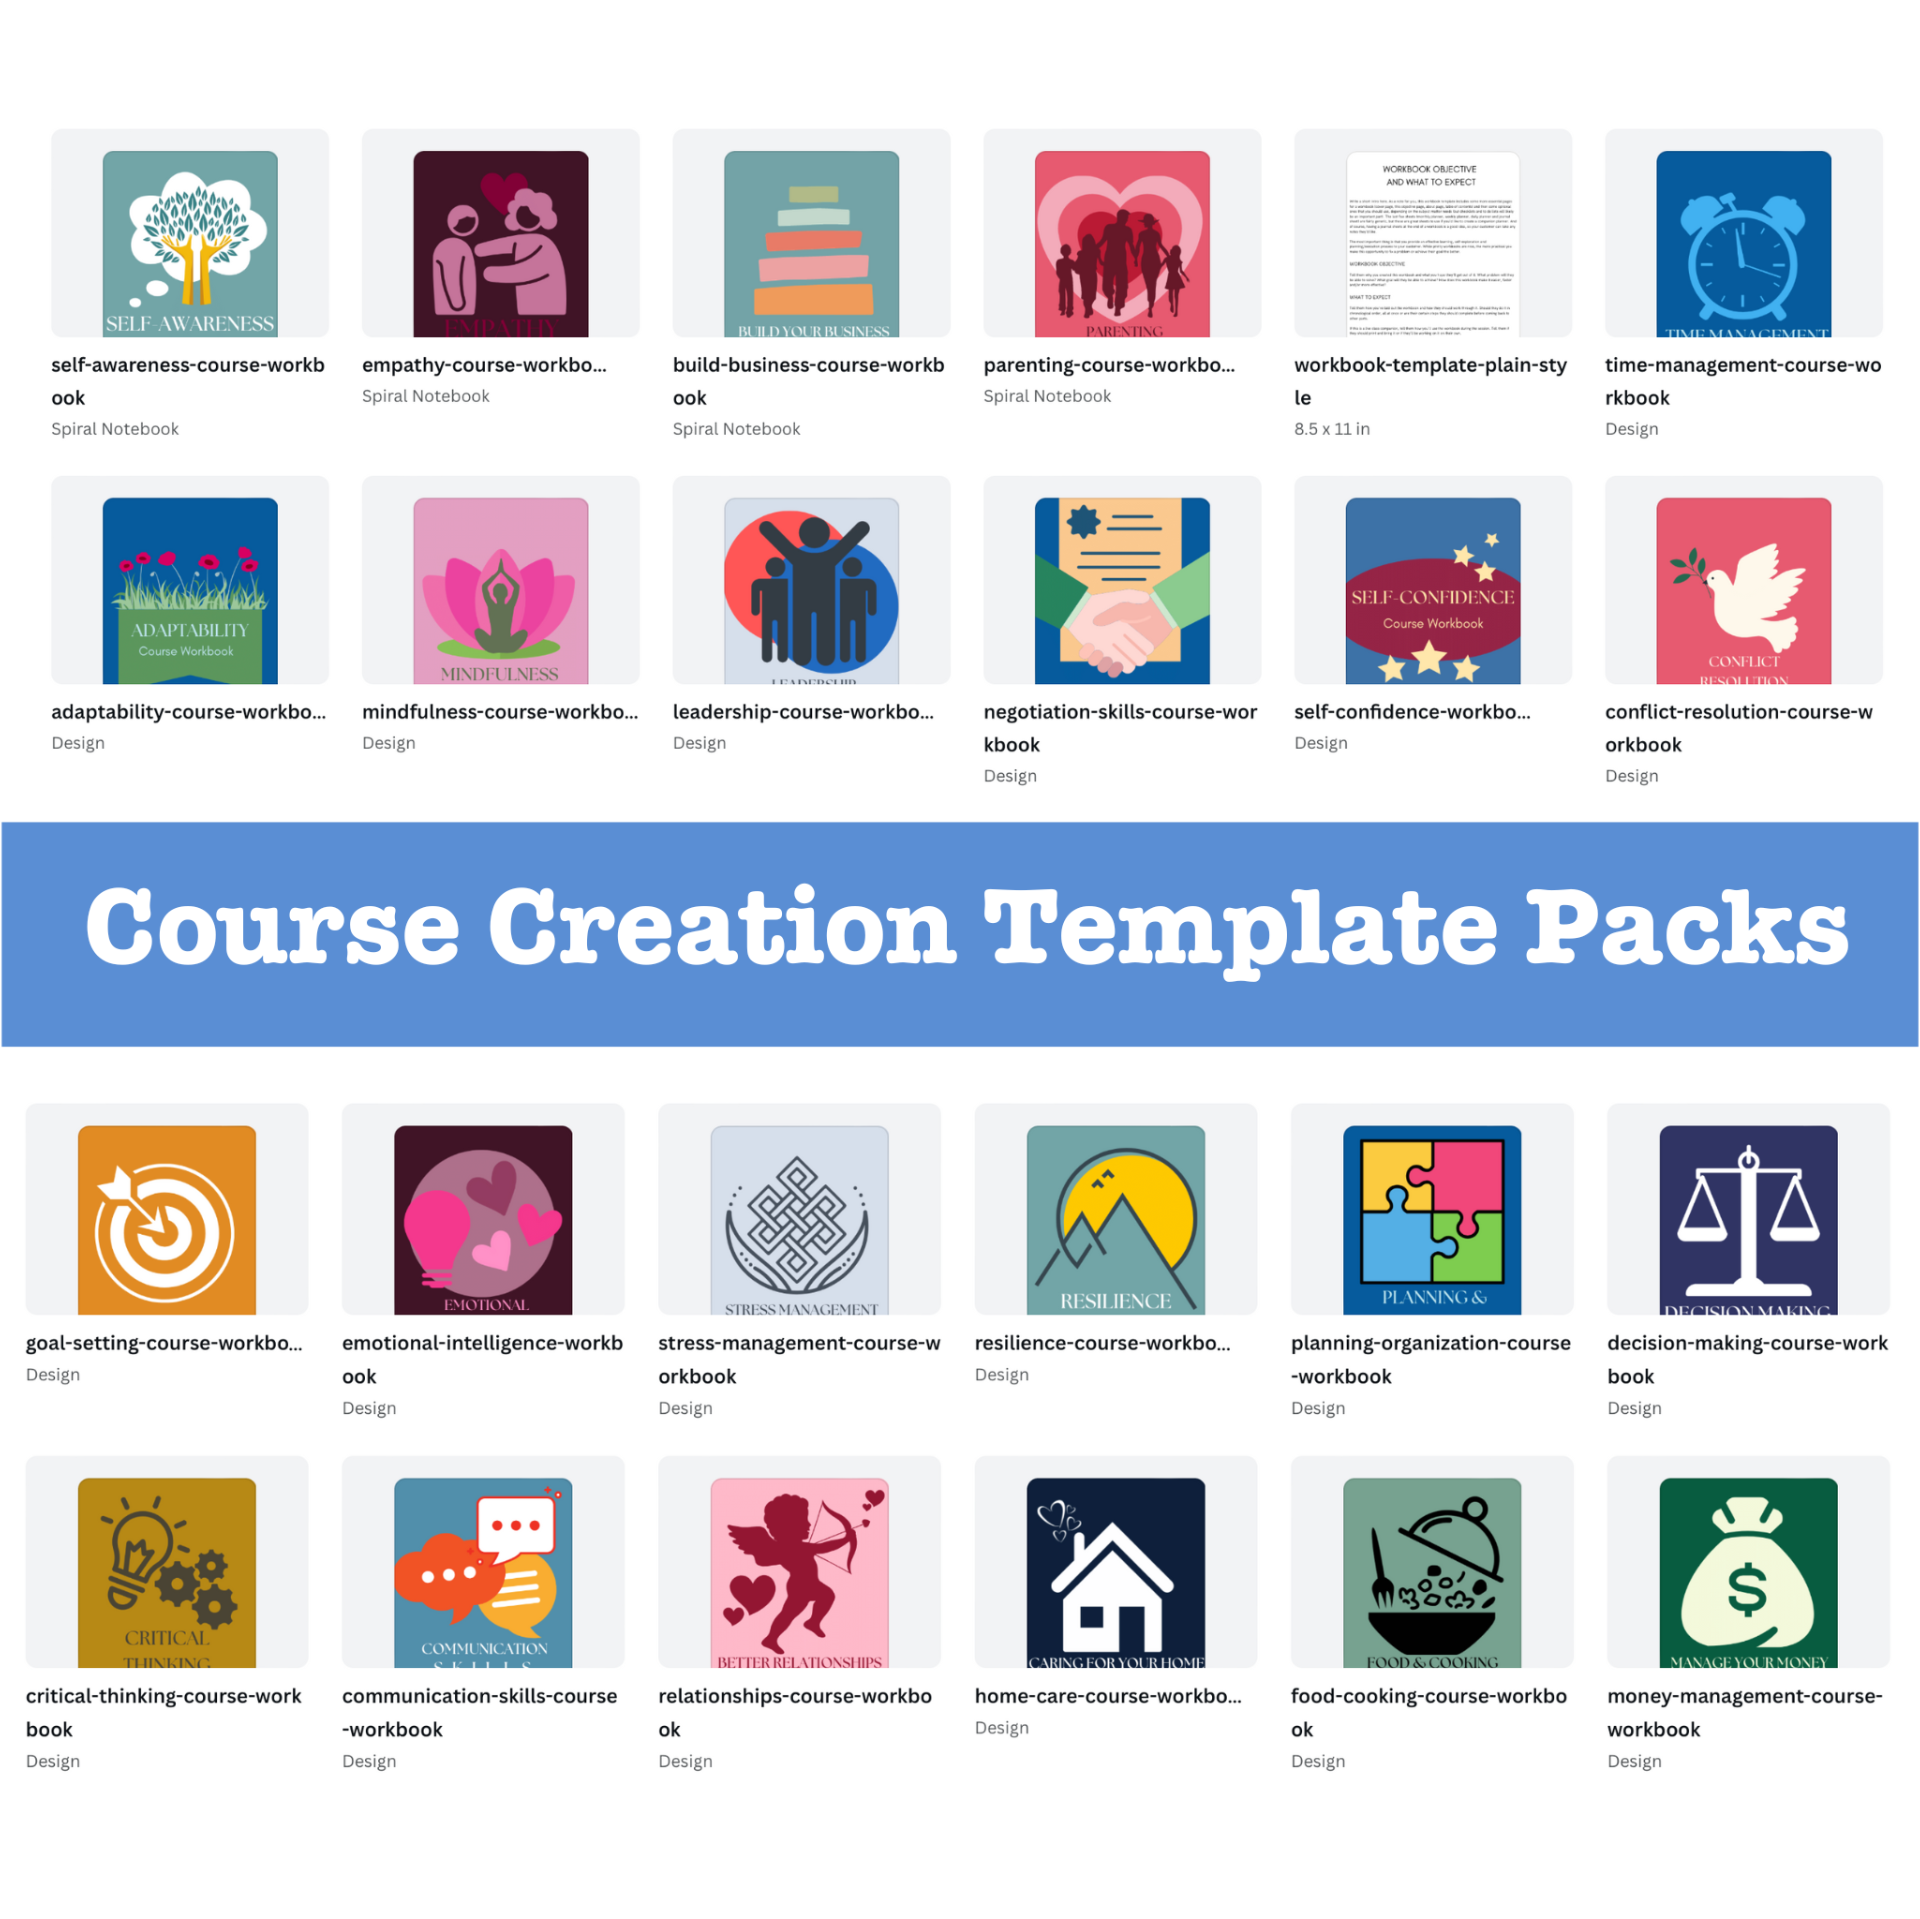 Course Creation Template Packs